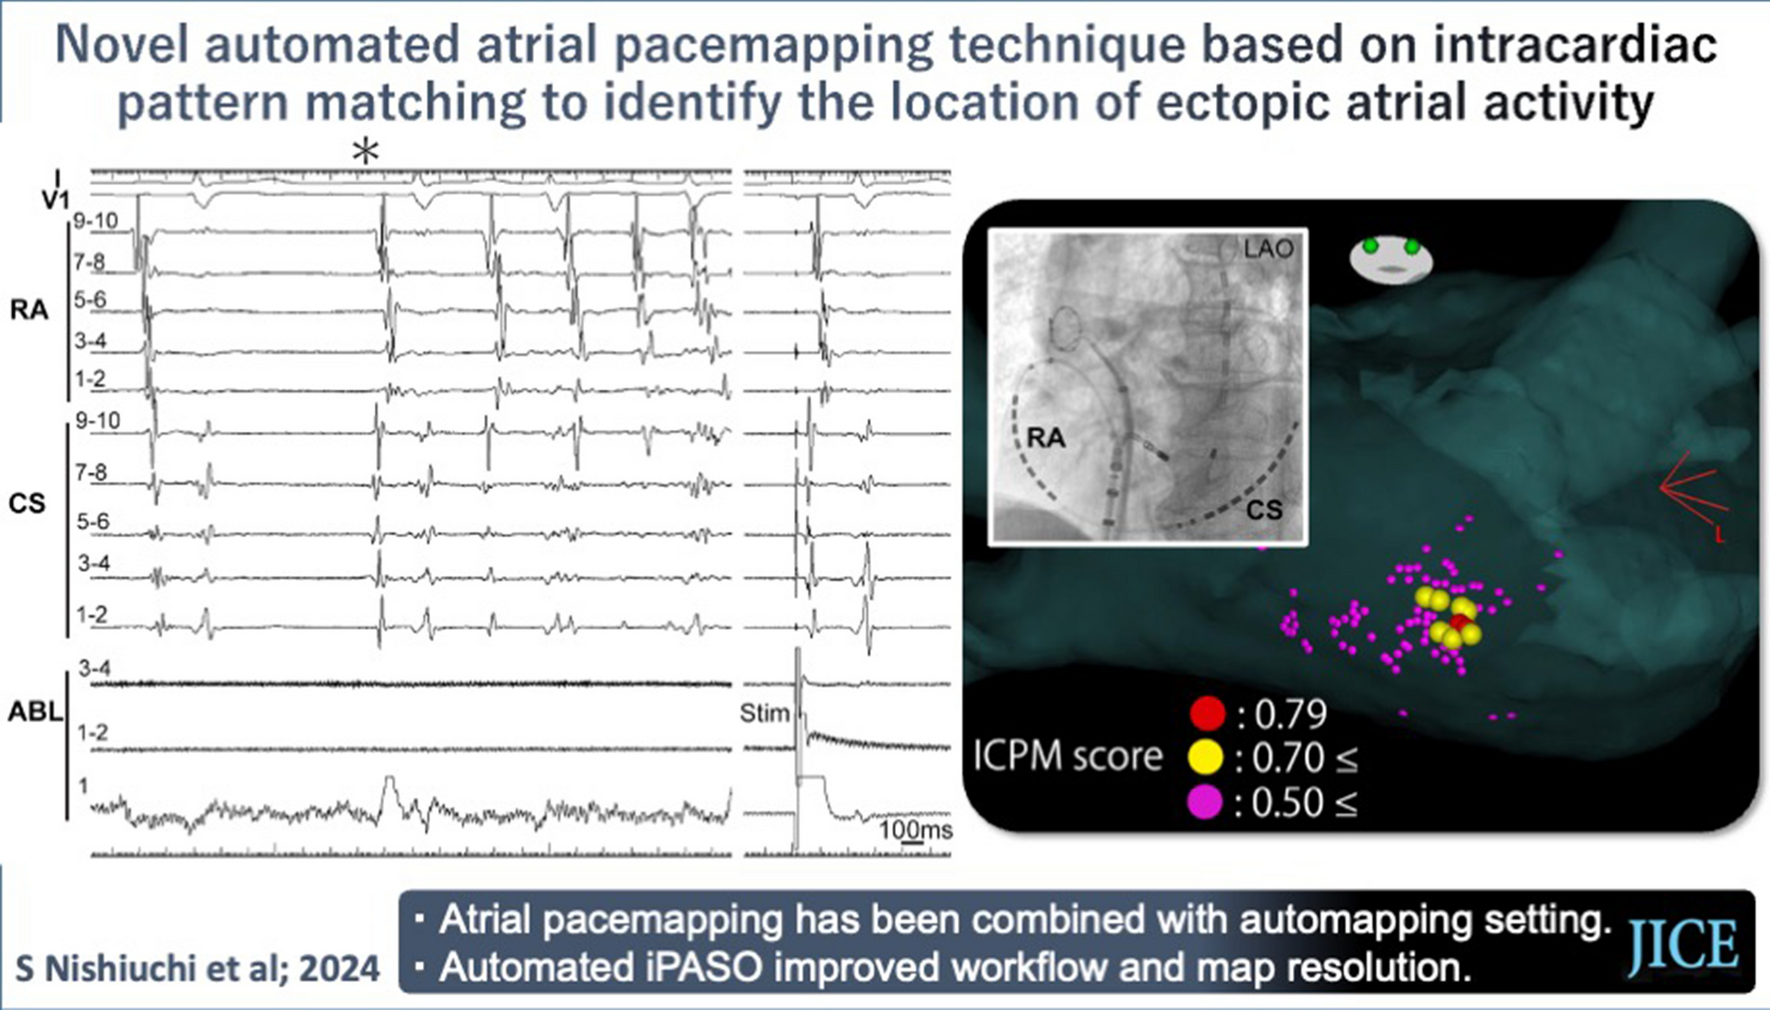 Novel automated atrial pacemapping technique based on intracardiac pattern matching to identify the location of ectopic atrial activity